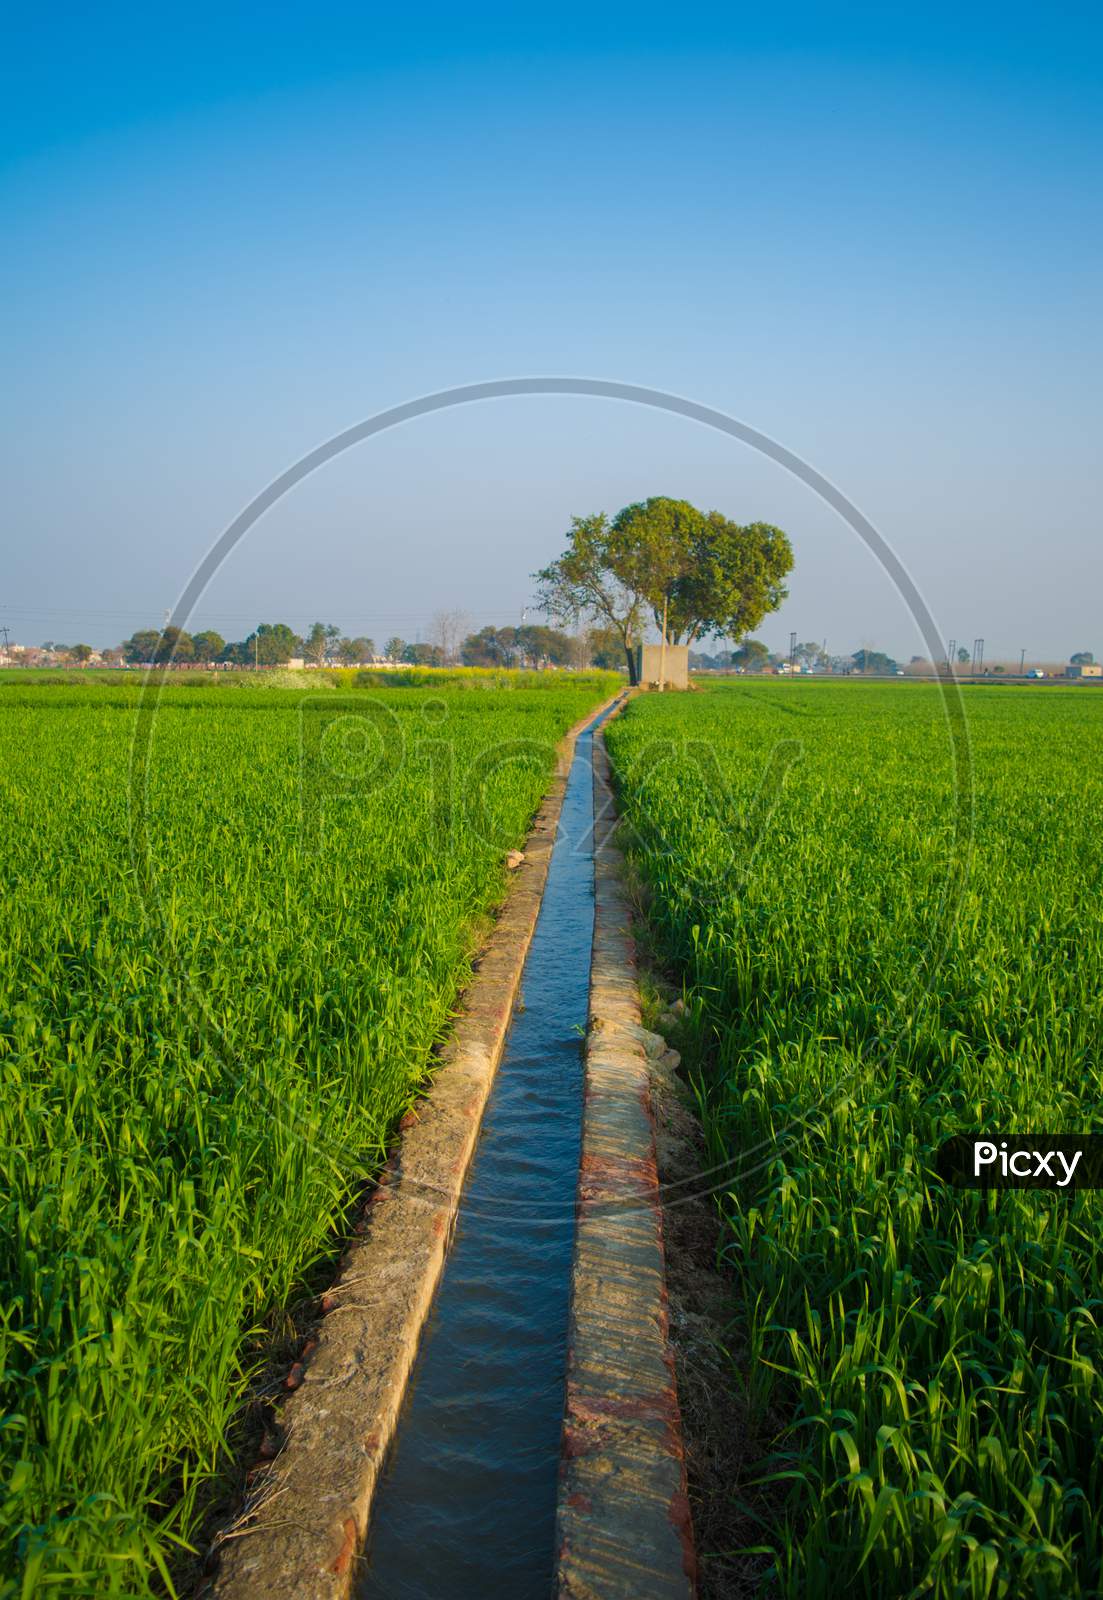 Field Of Young Wheat, Agricultural Irrigation System Watering A Green Wheat Field In India.